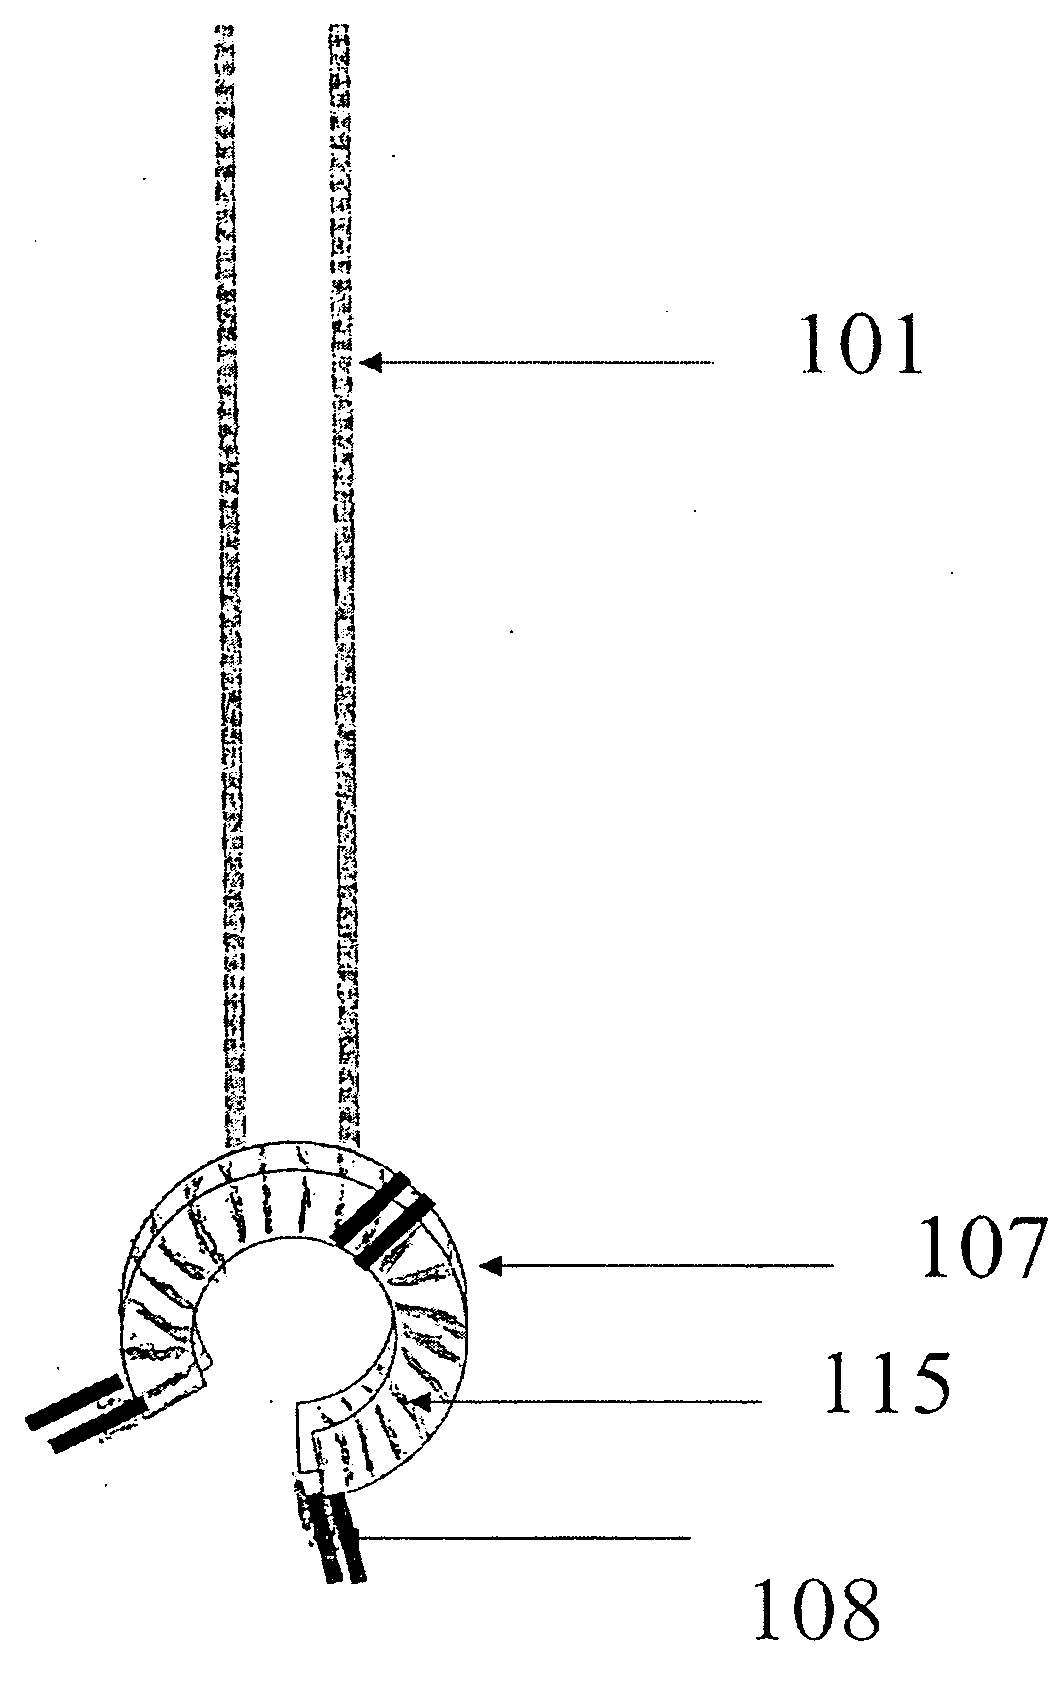 Suturing Device for Anastomisis of Lumens